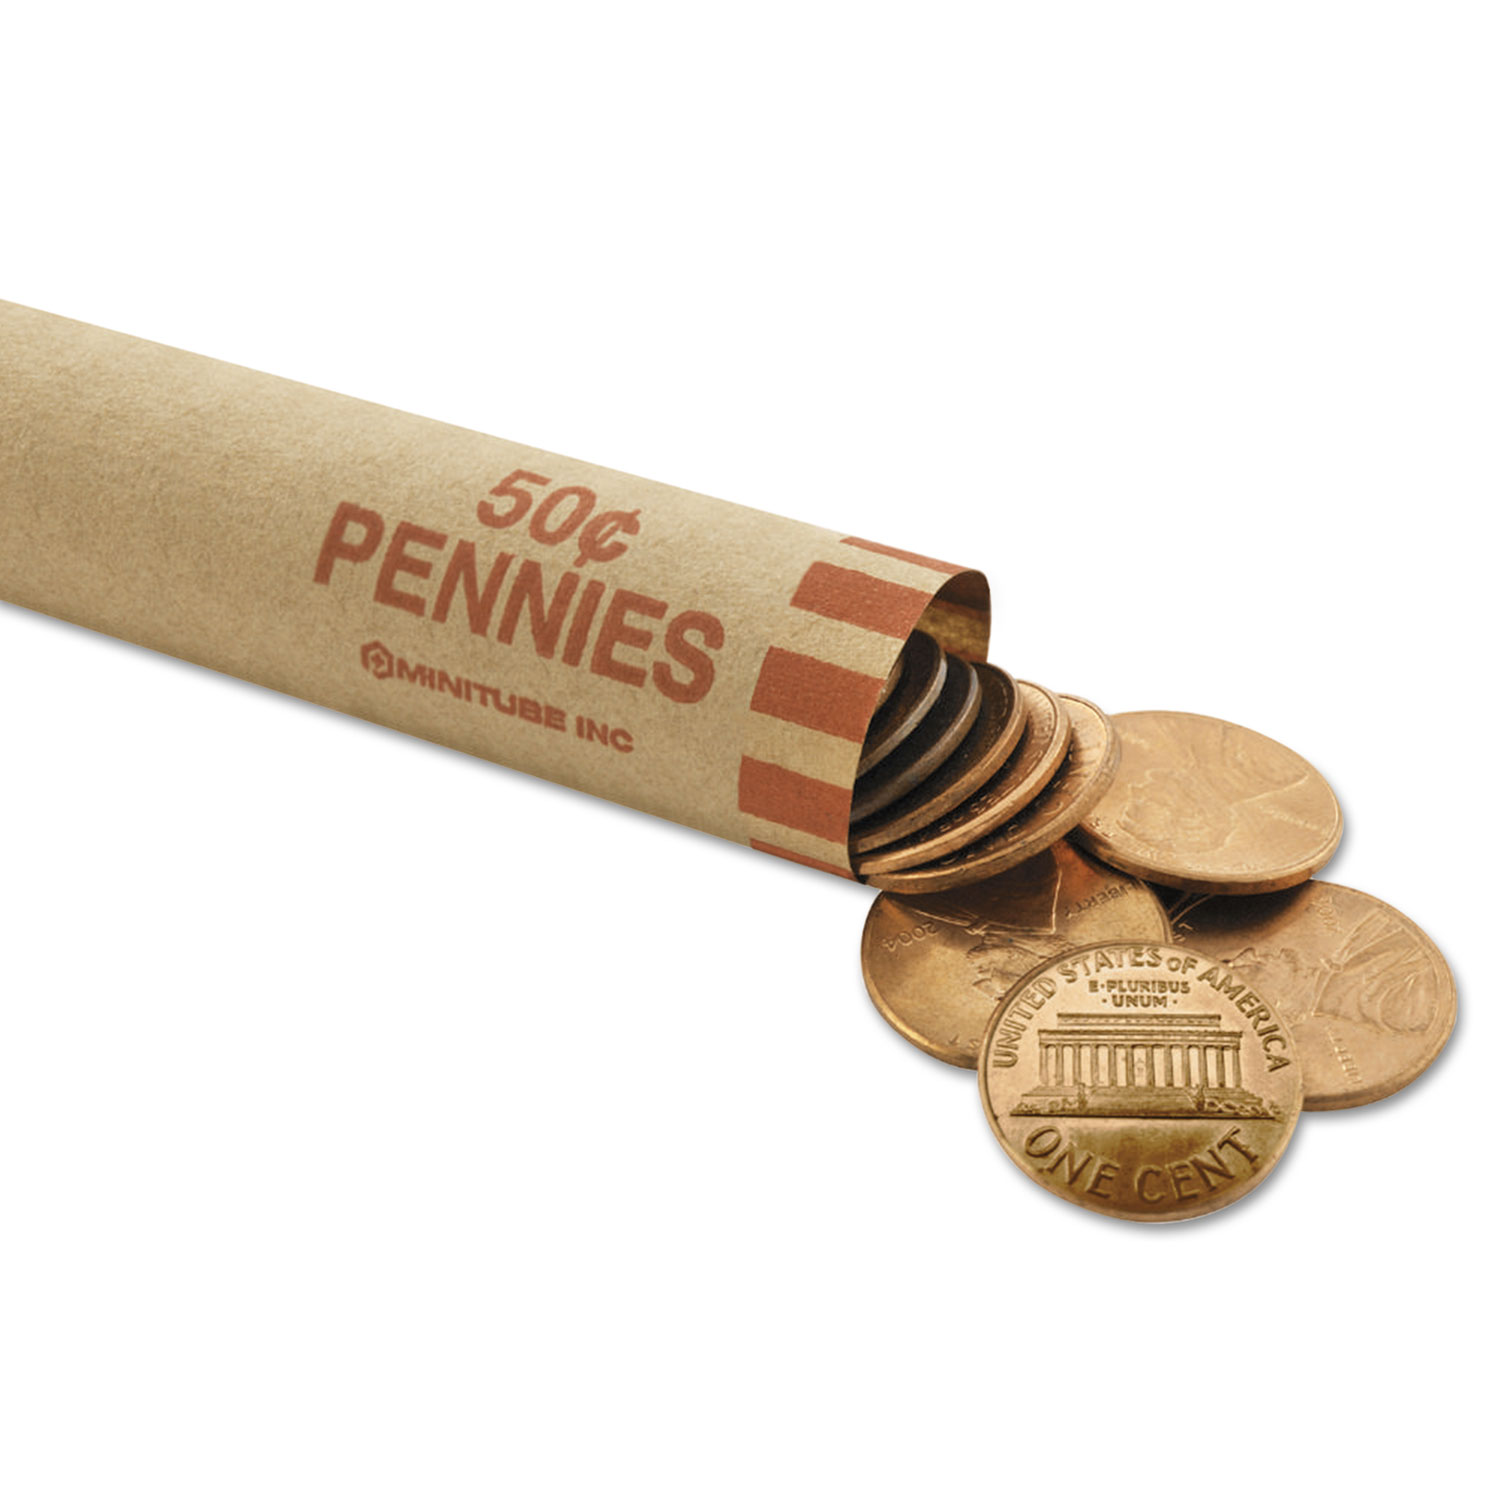  MMF Industries 2160640A07 Nested Preformed Coin Wrappers, Pennies, $.50, Red, 1000 Wrappers/Box (MMF2160640A07) 